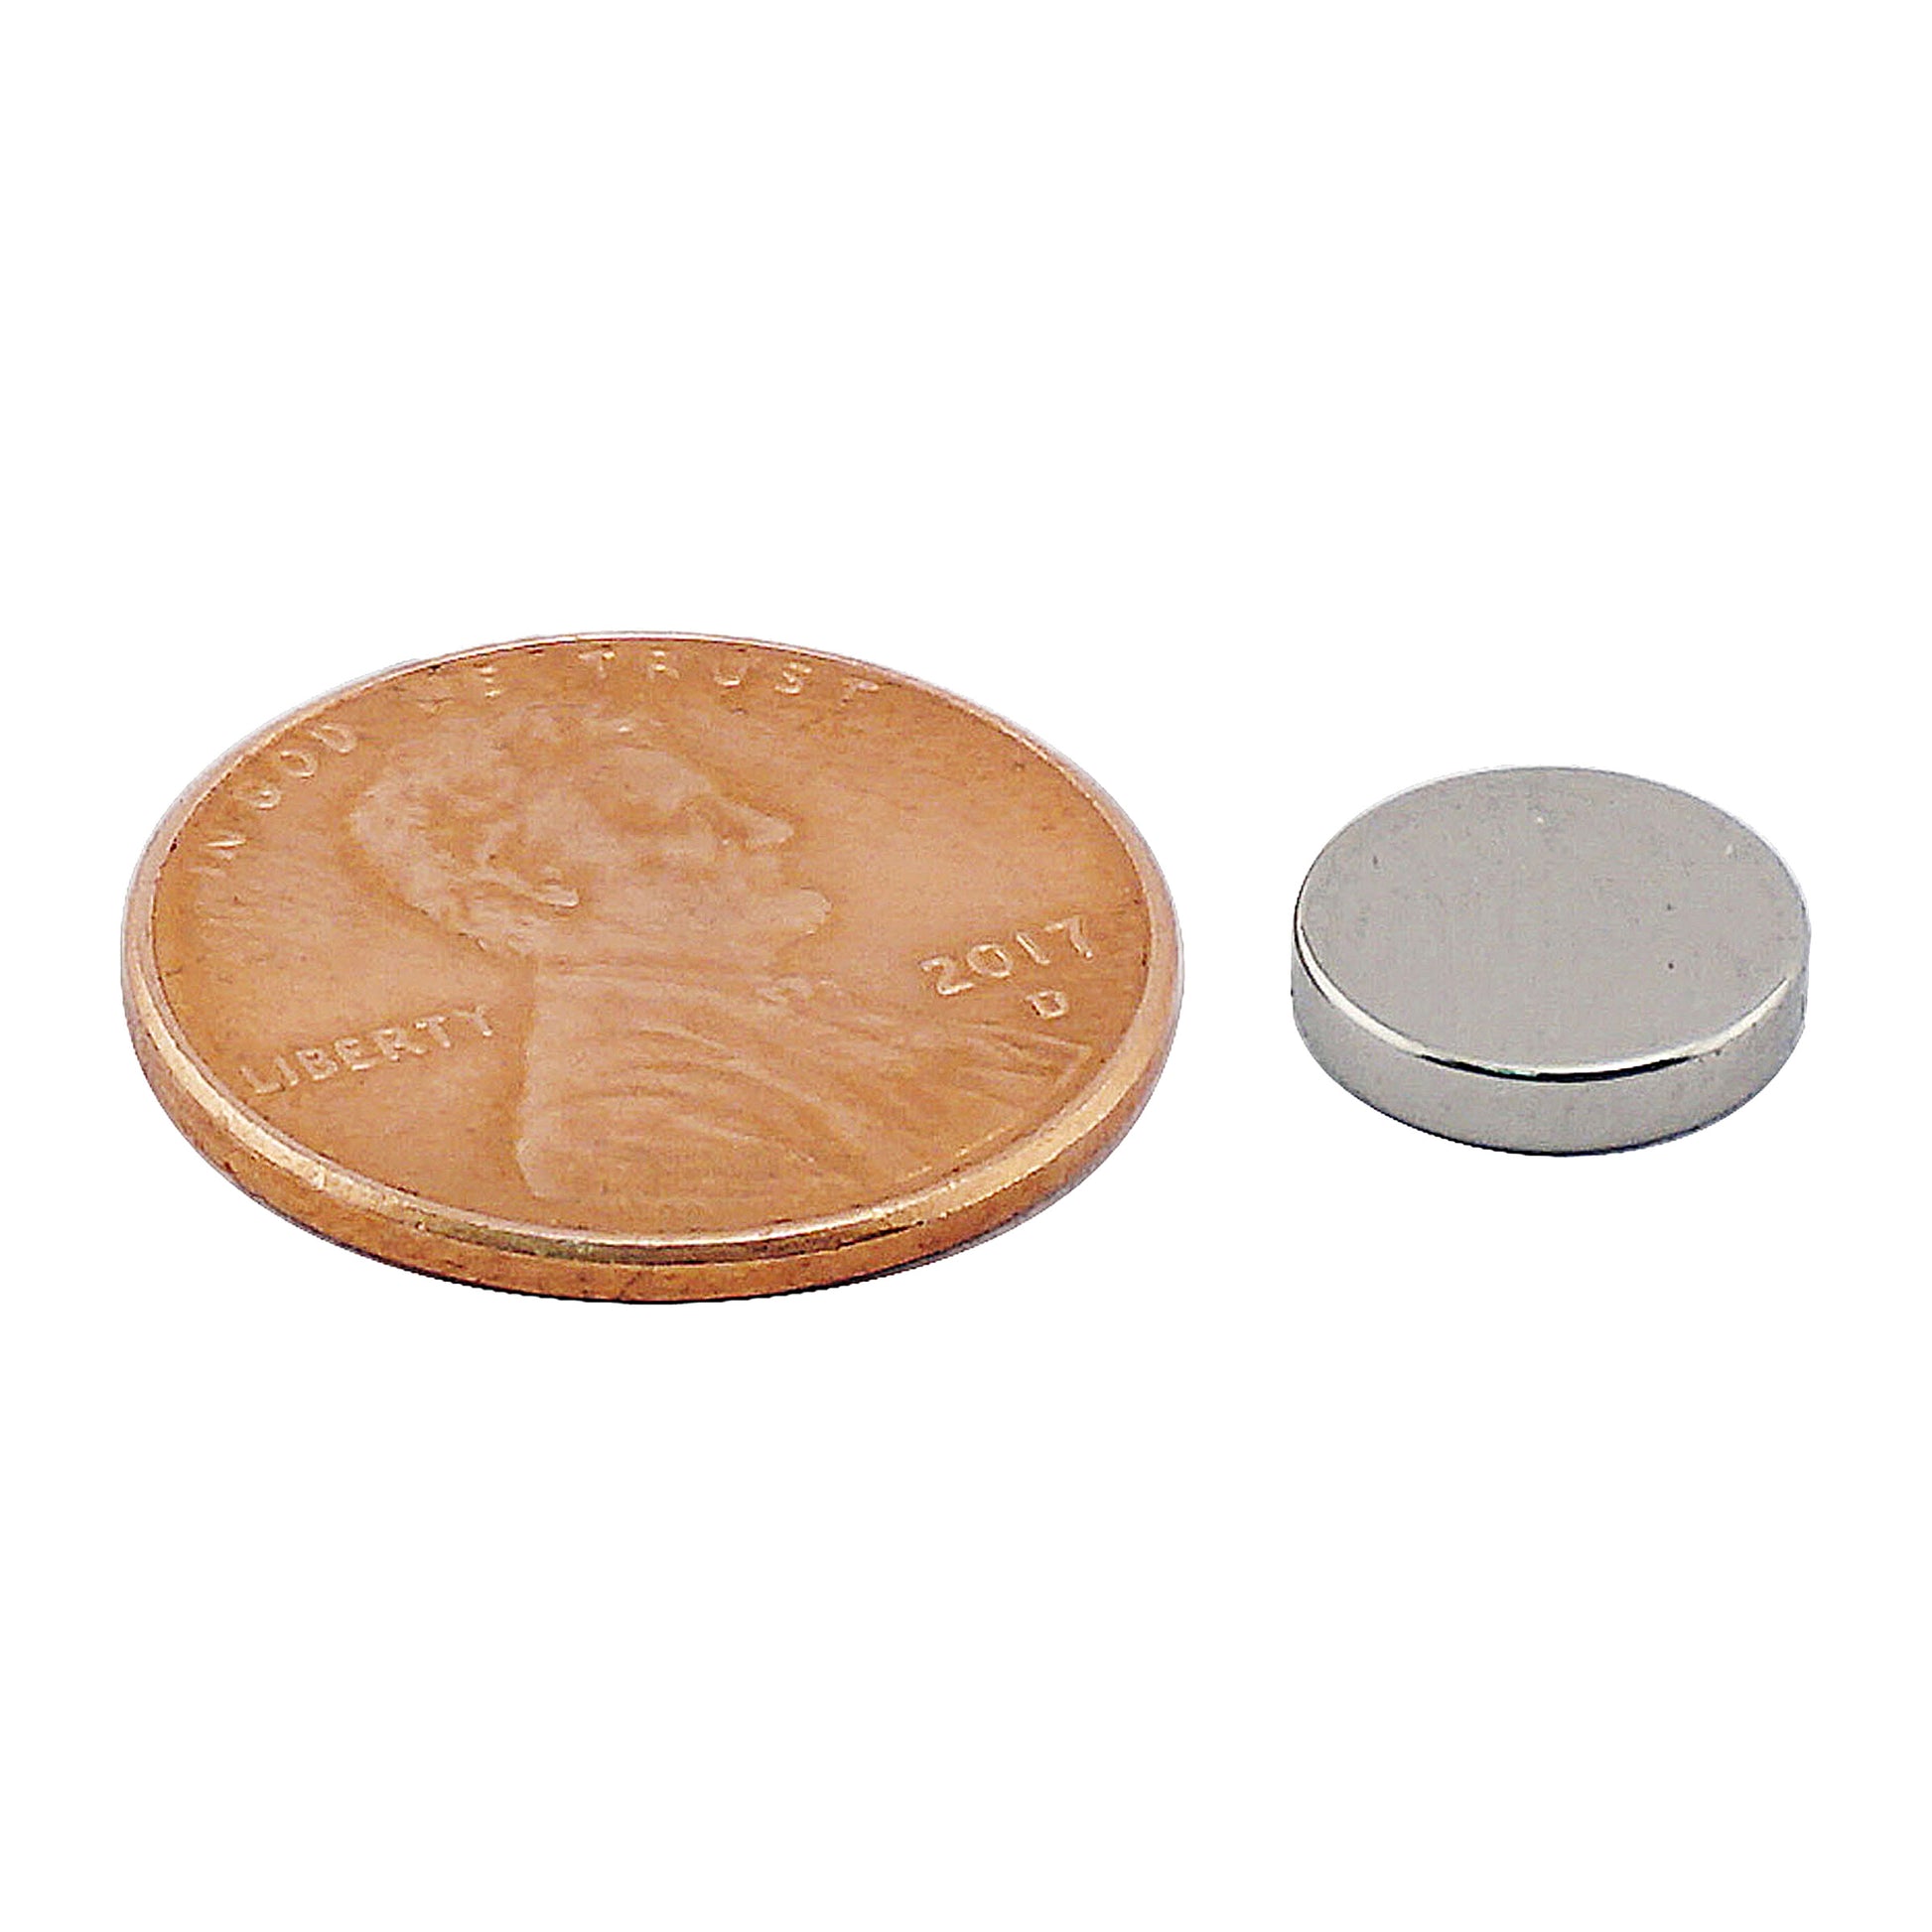 Load image into Gallery viewer, ND45-3607N Neodymium Disc Magnet - Compared to Penny for Size Reference